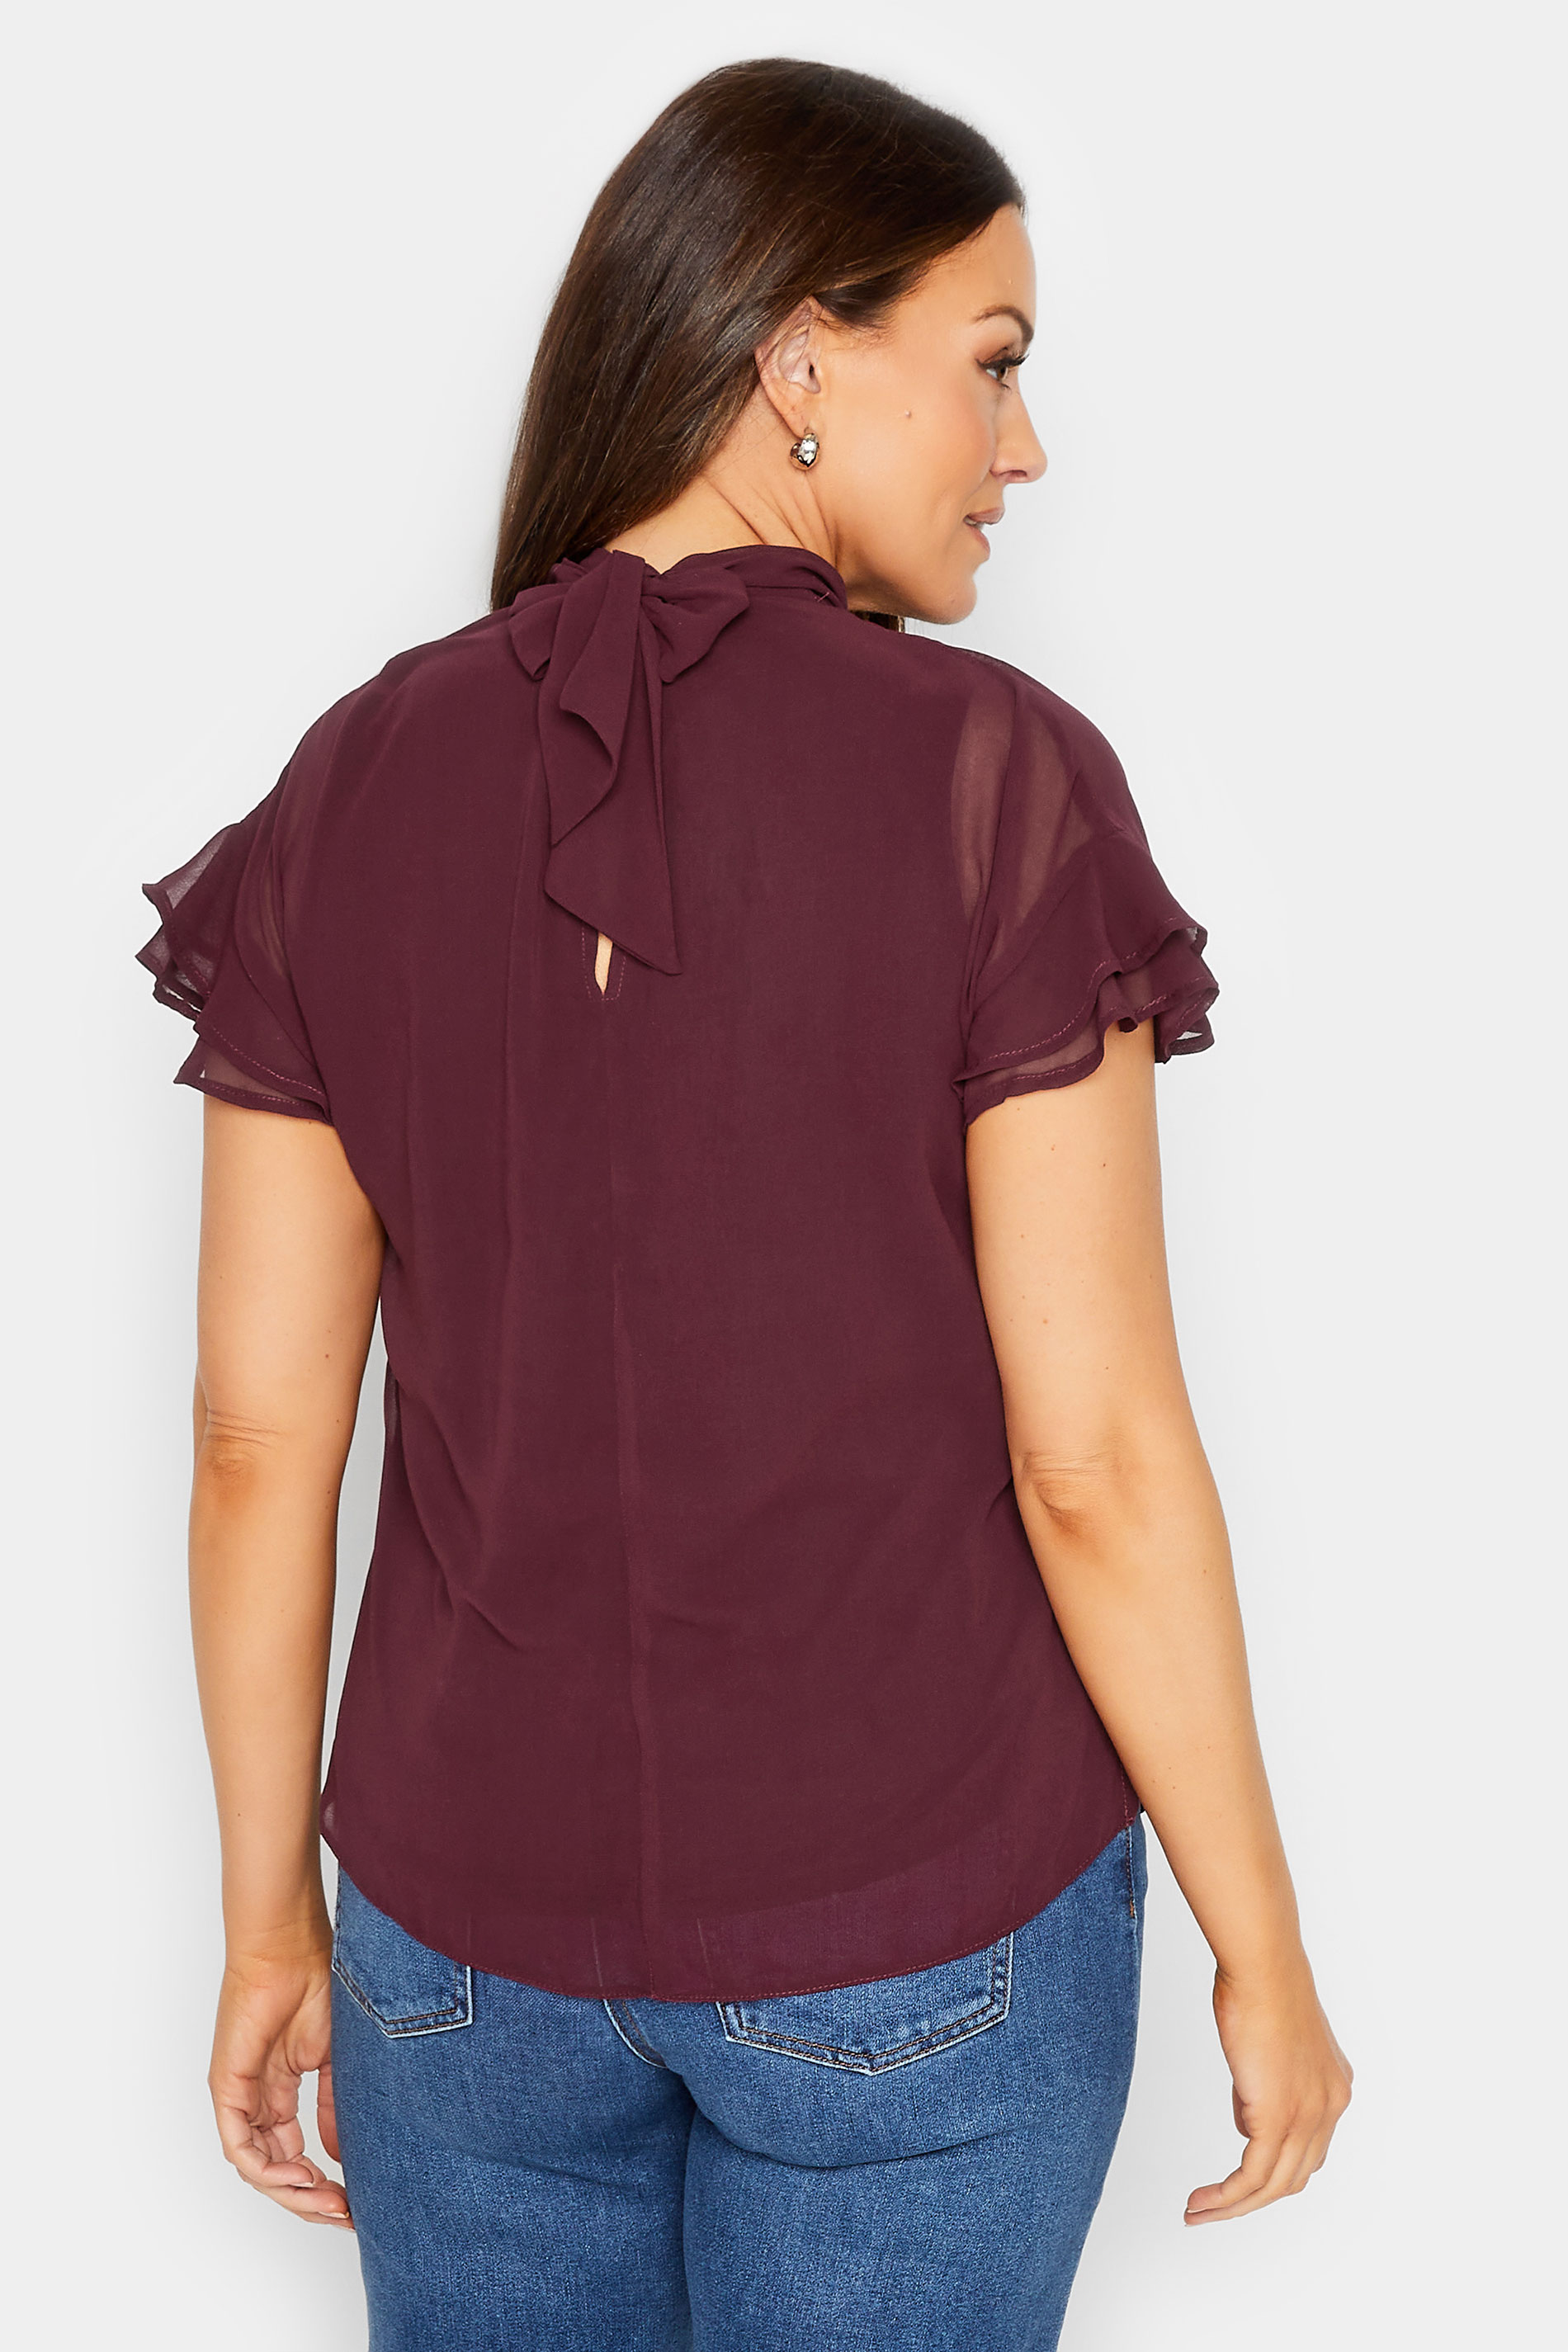 M&Co Dark Red High Neck Frill Sleeve Blouse | M&Co 3